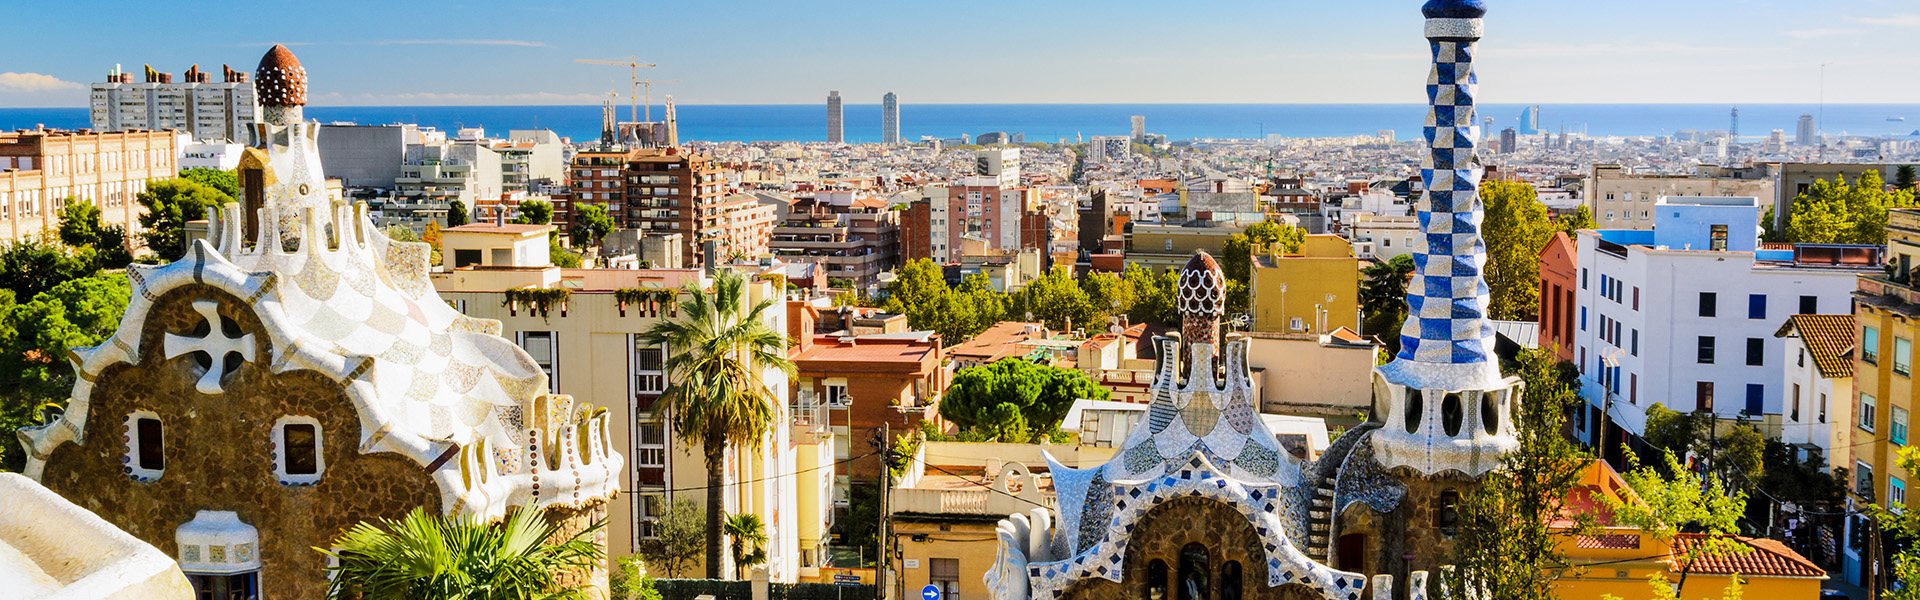 Barcelona is one of the most demanded tourist destinations reachable from the port of Civitavecchia